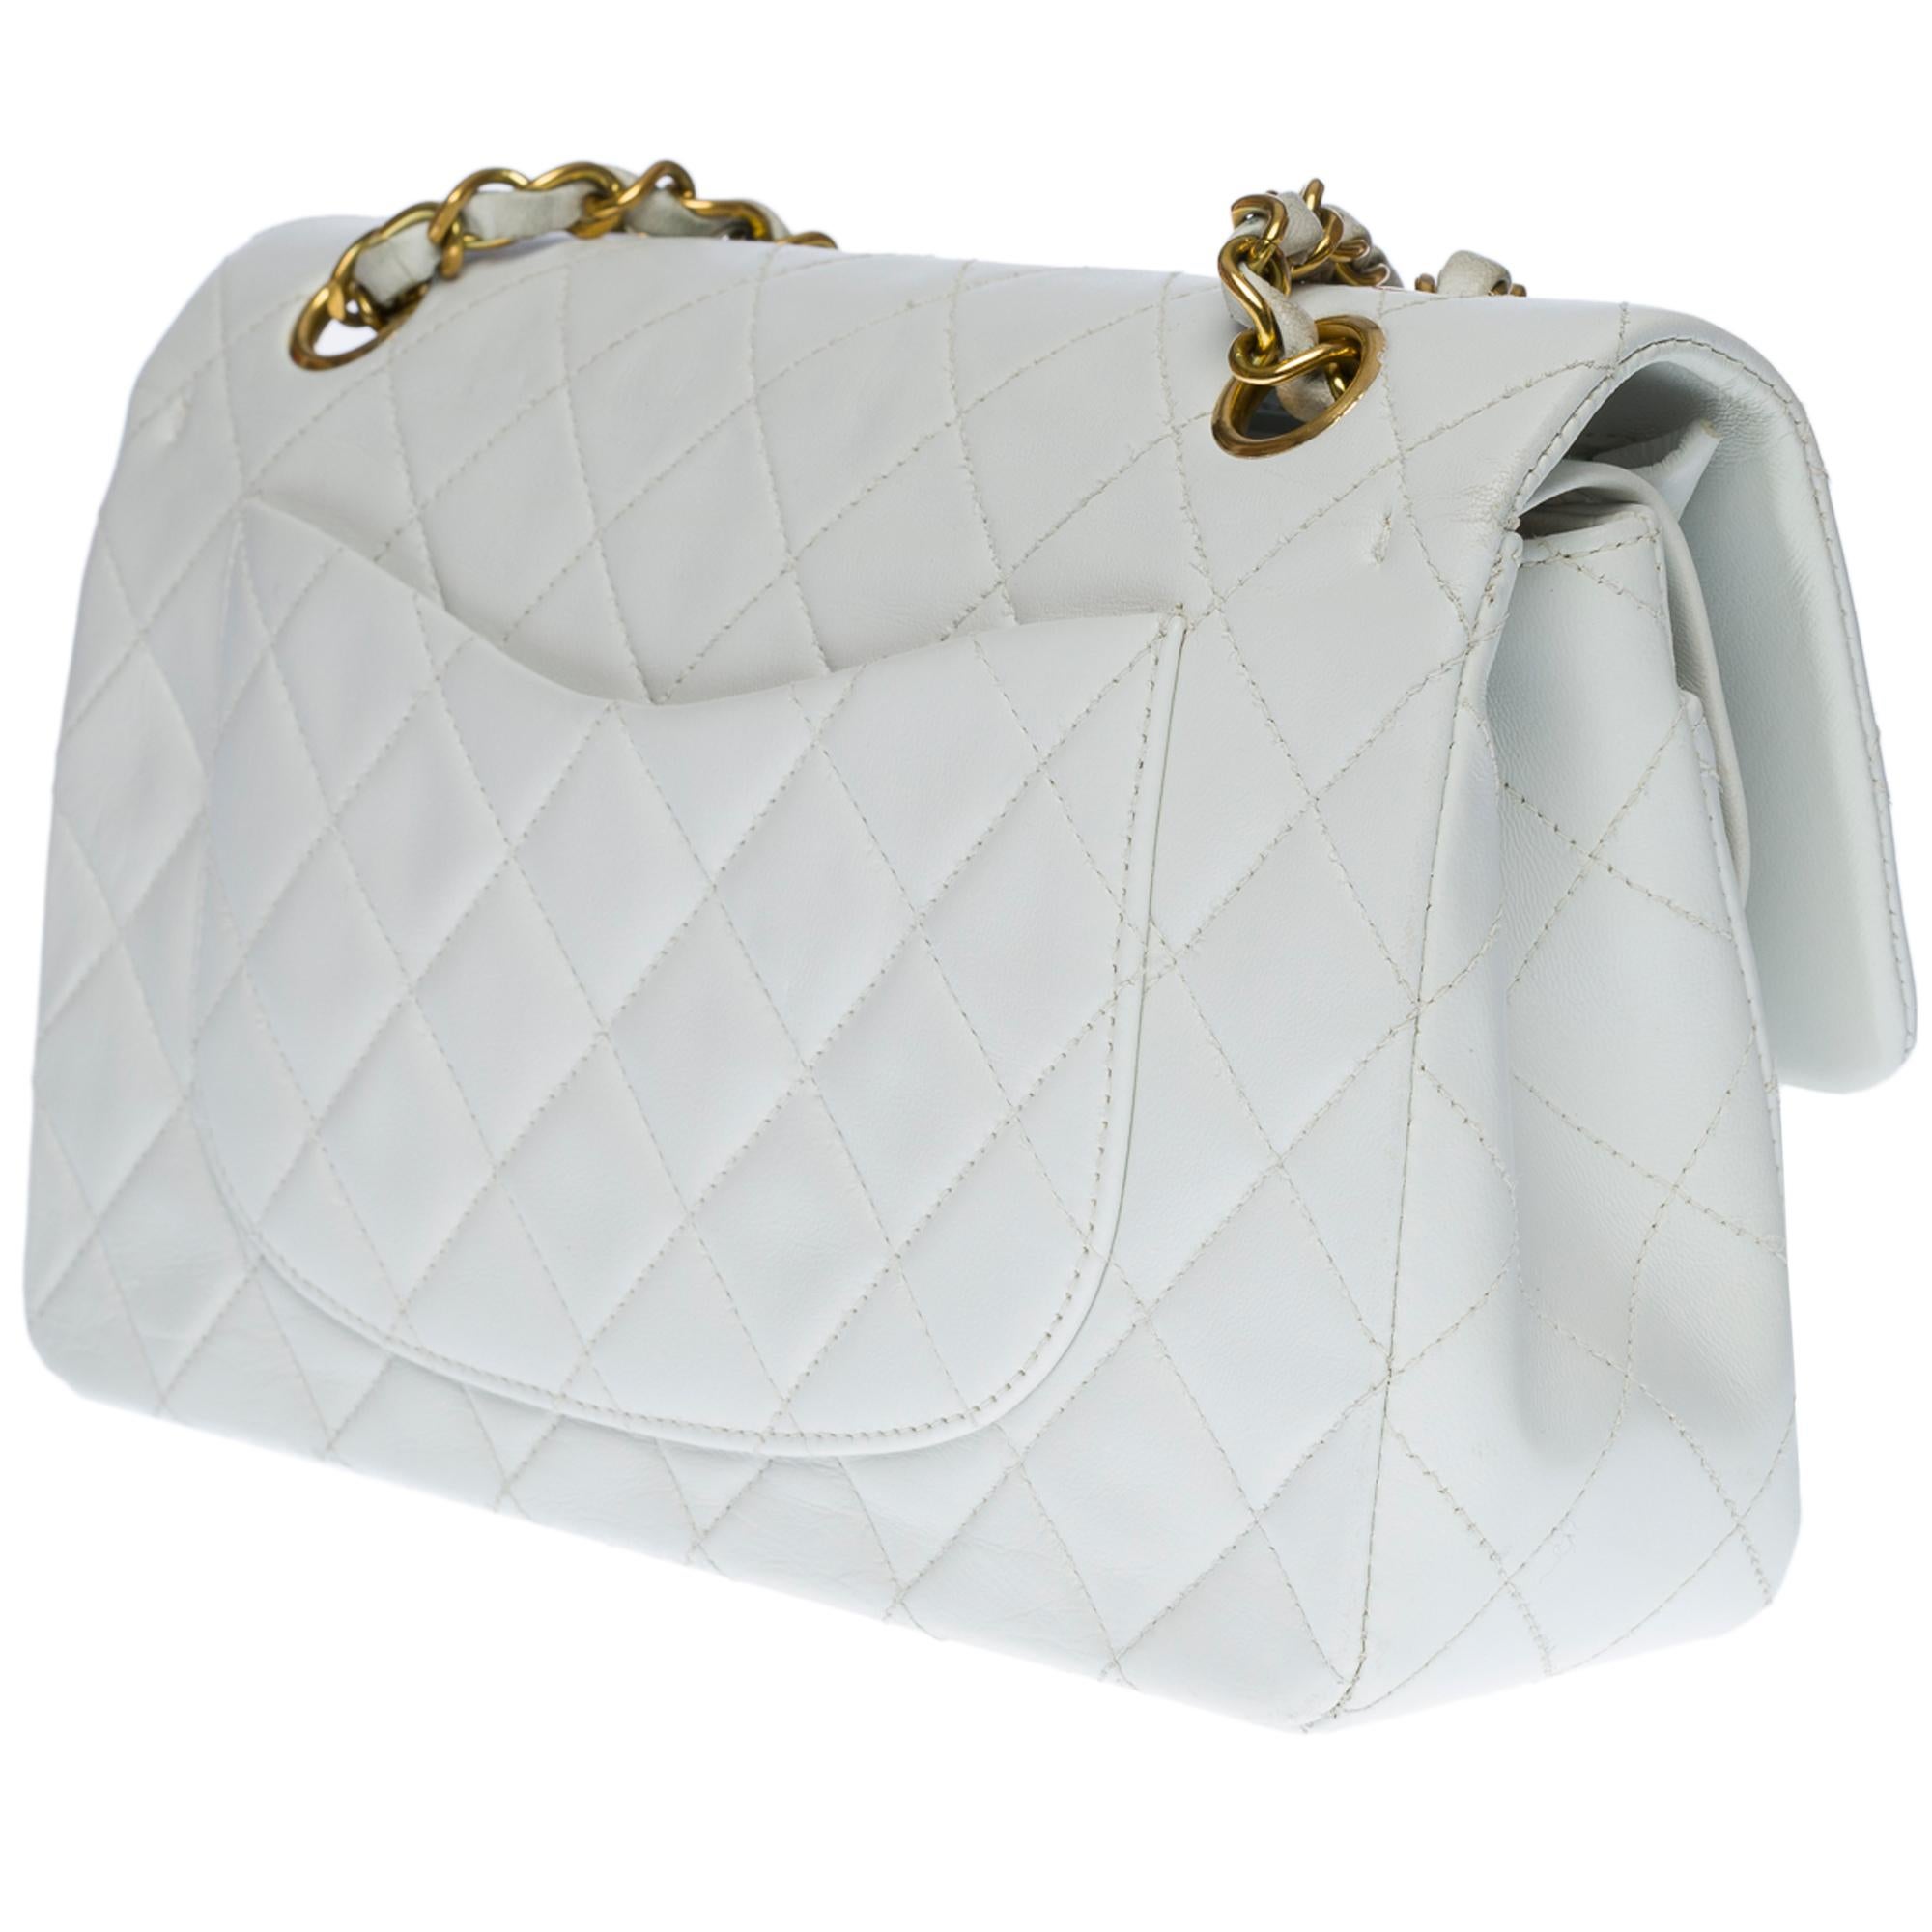 Women's Chanel Timeless 23cm double flap Shoulder bag in White quilted lambskin, GHW